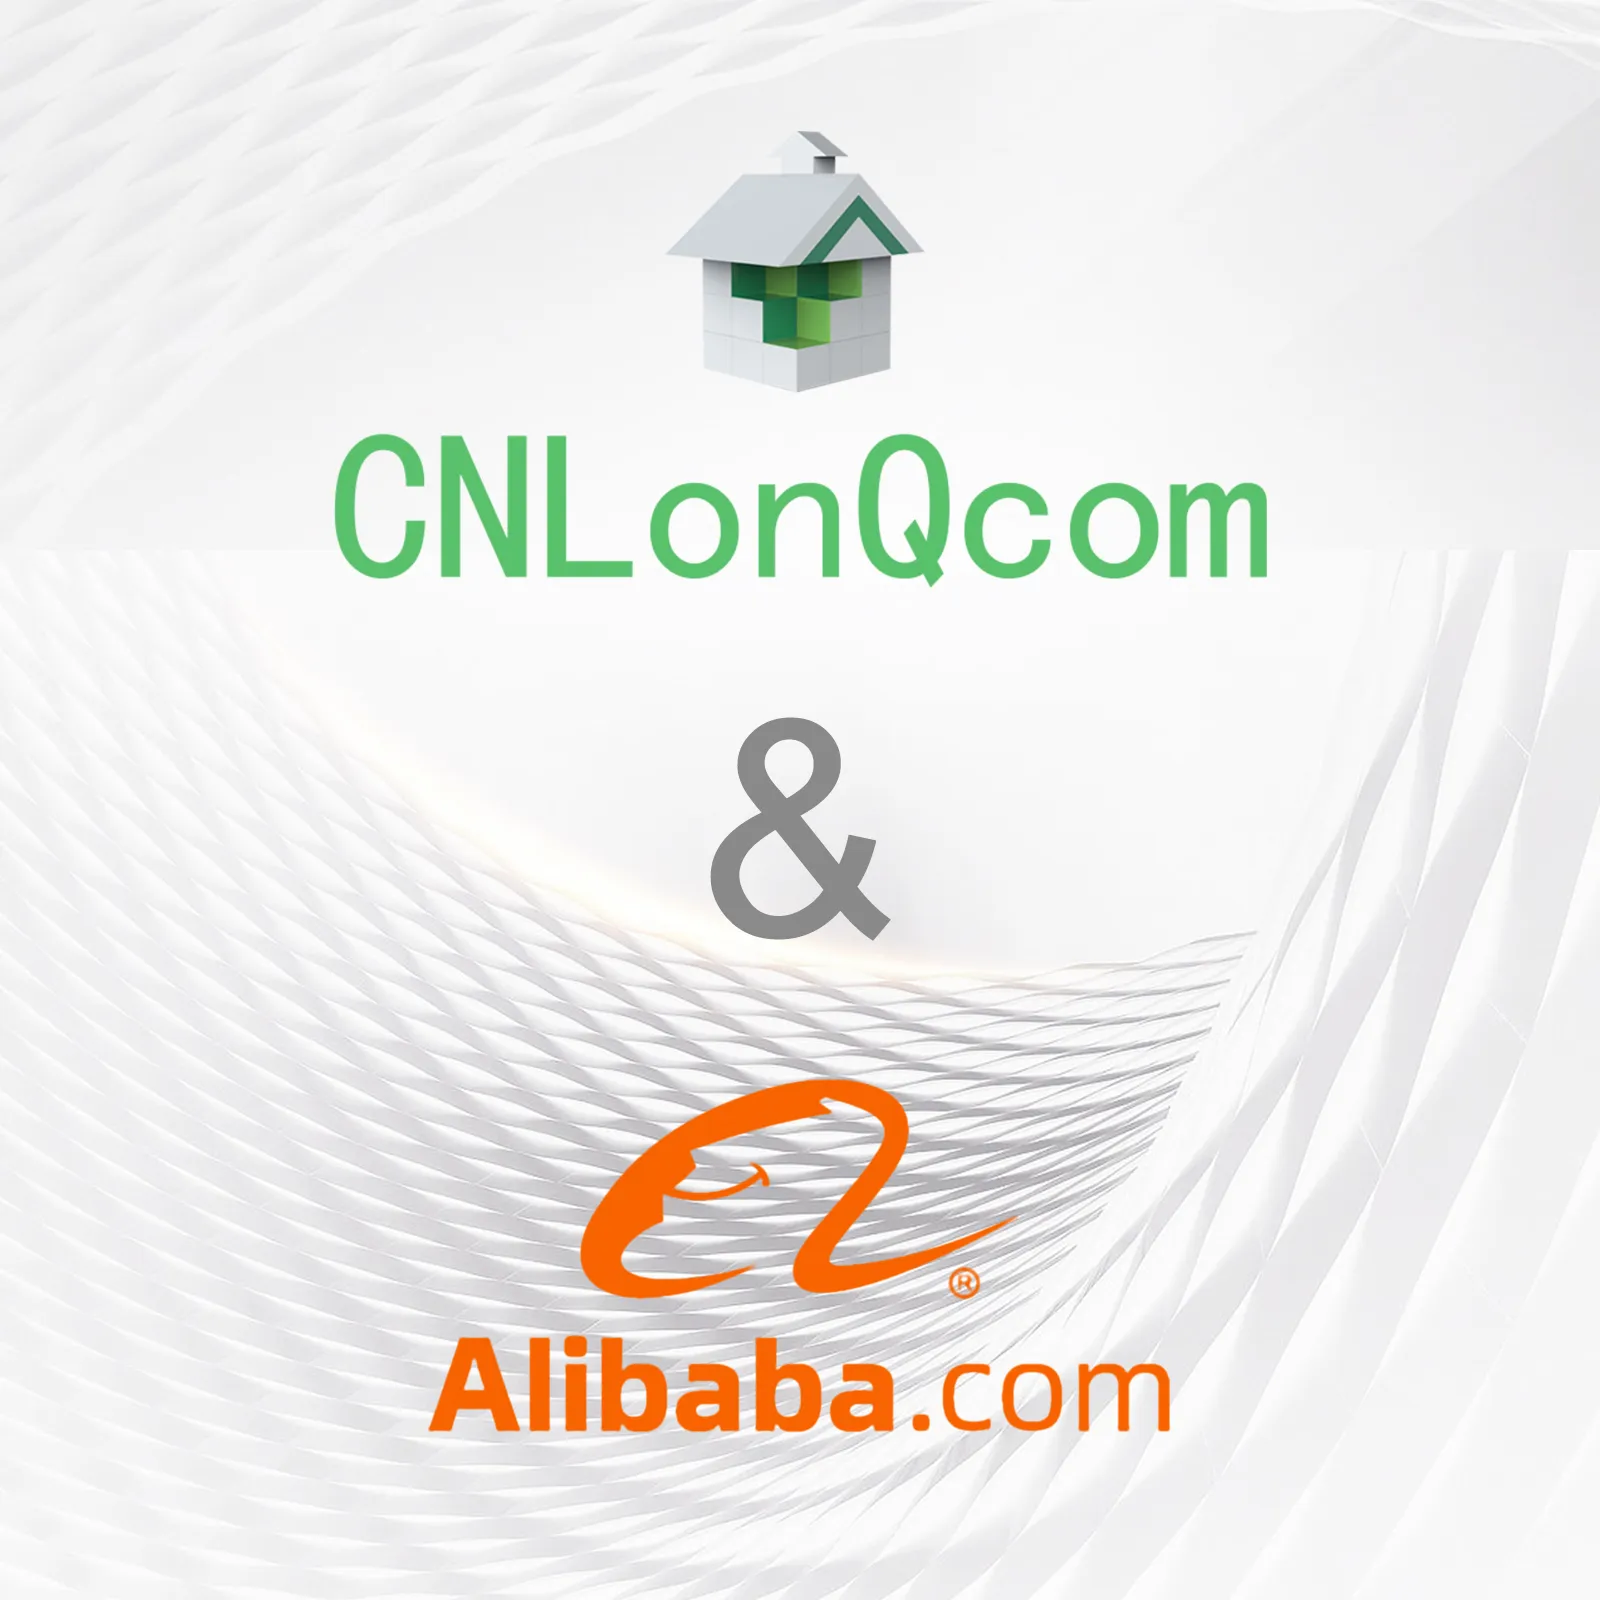 CNLonQcom Now Available on Alibaba